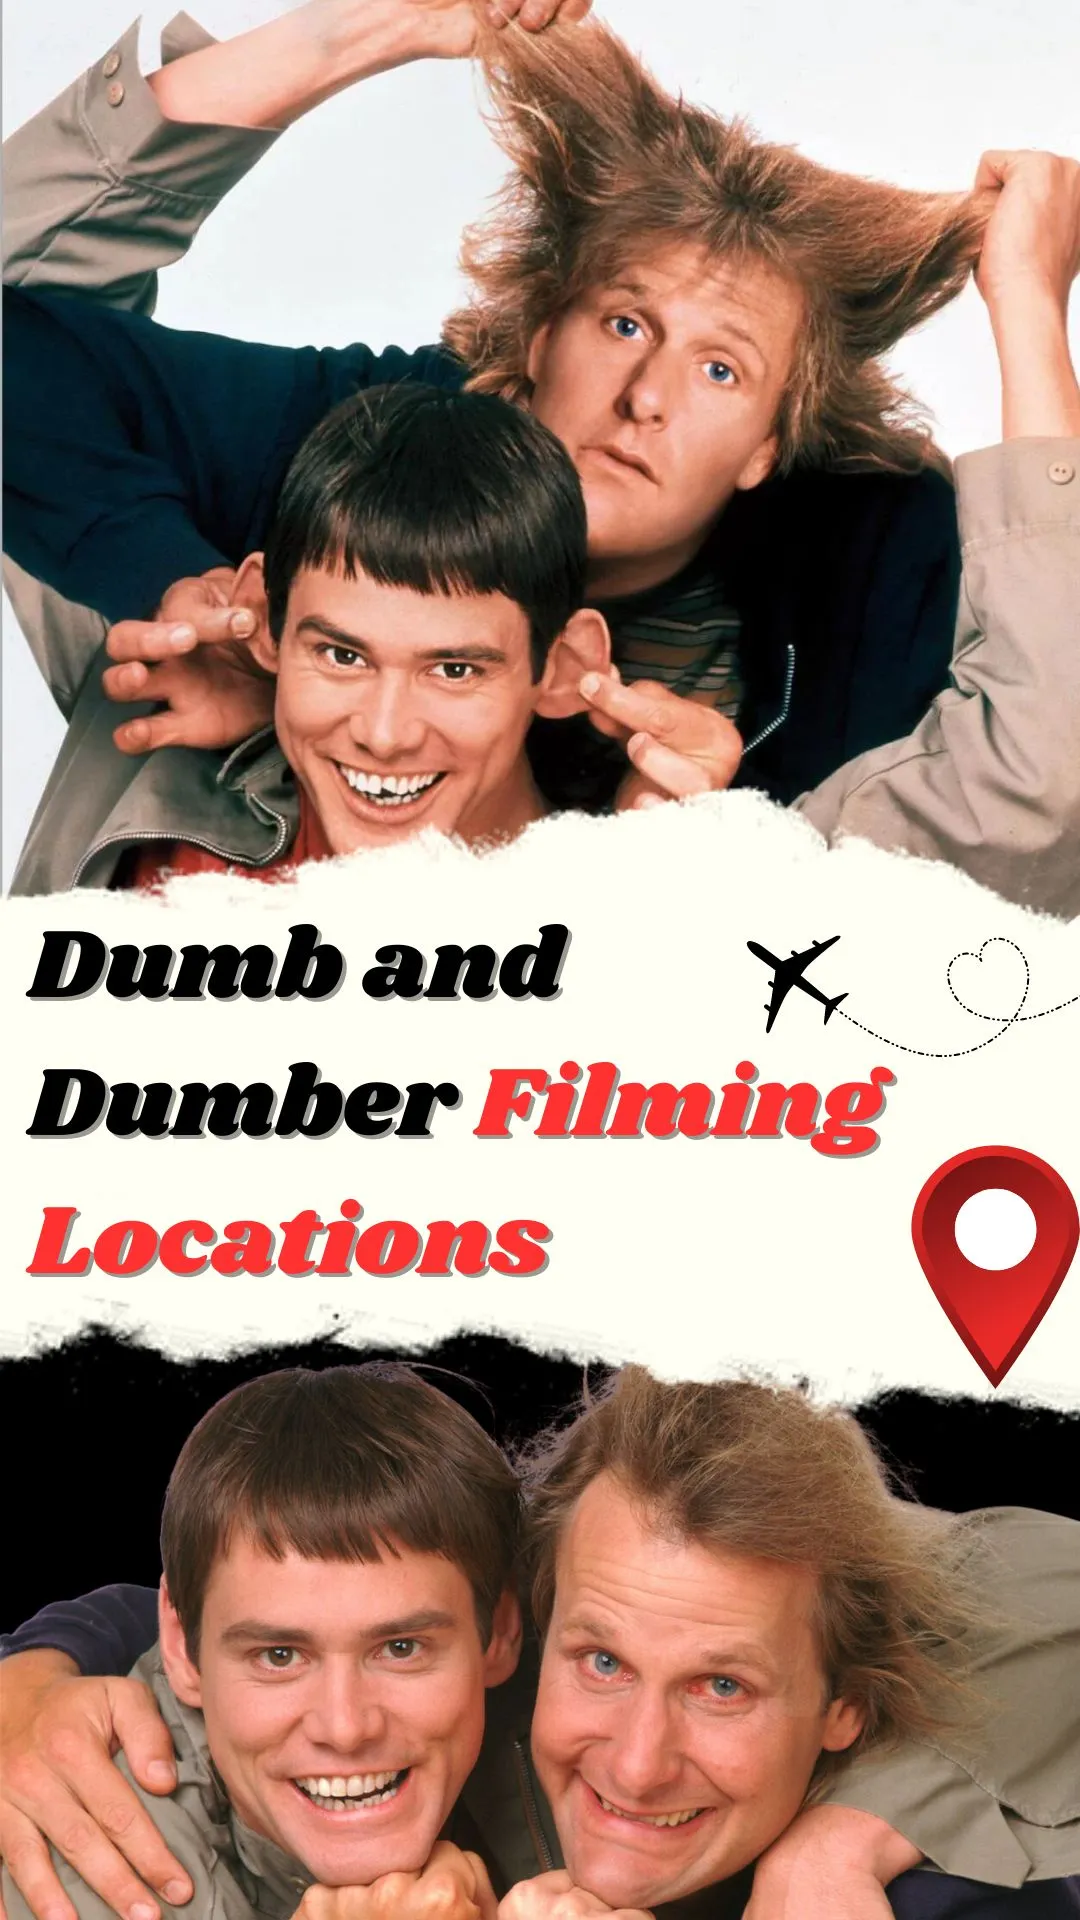 Dumb and Dumber Filming Locations